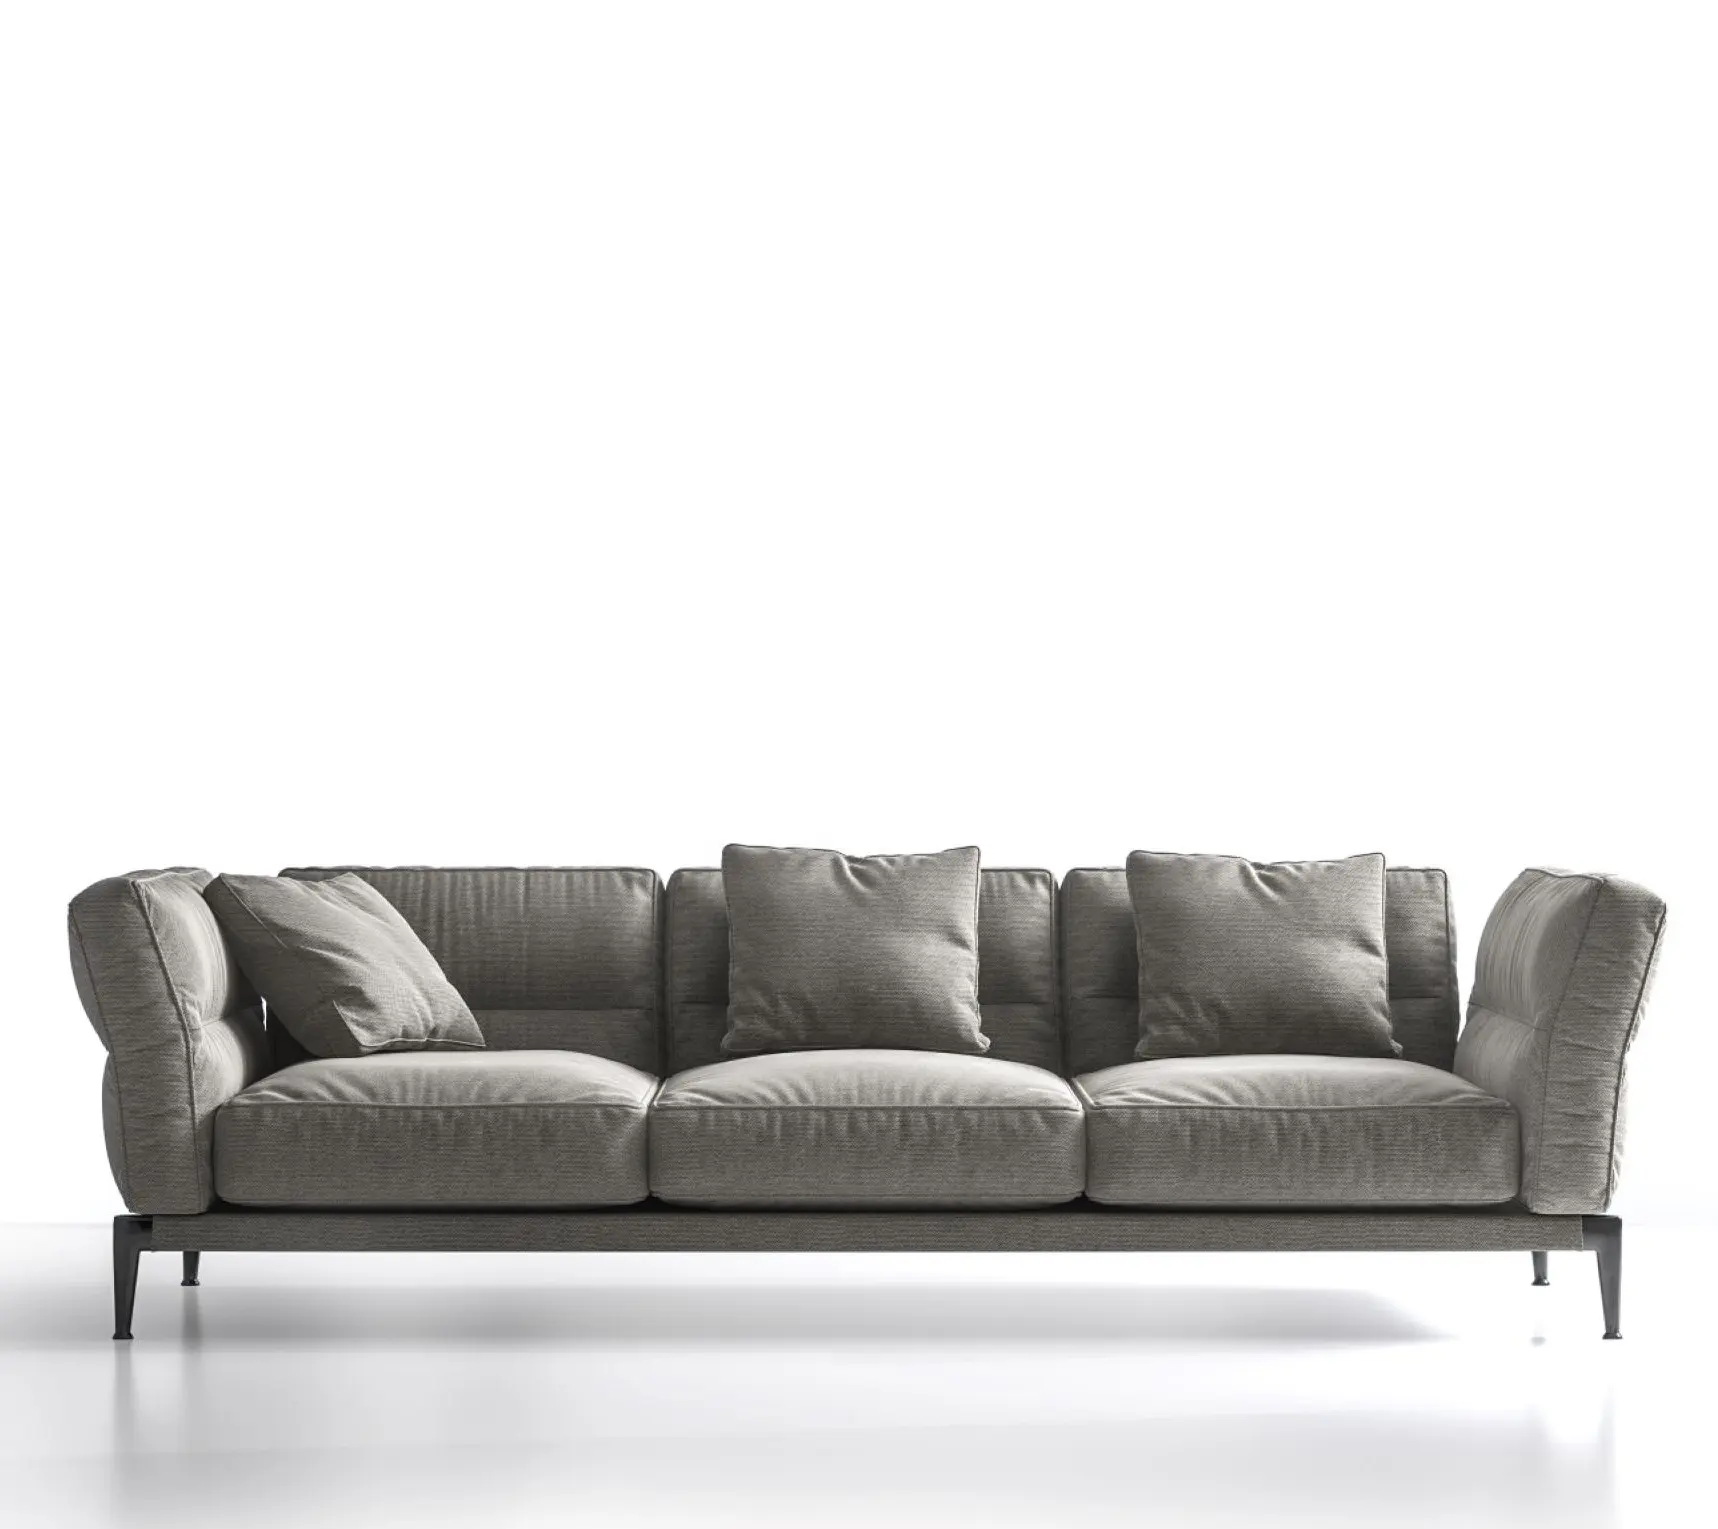 Top quality modern and elegant style 3 seat Sofa 100% Made in Italy for retail and for export